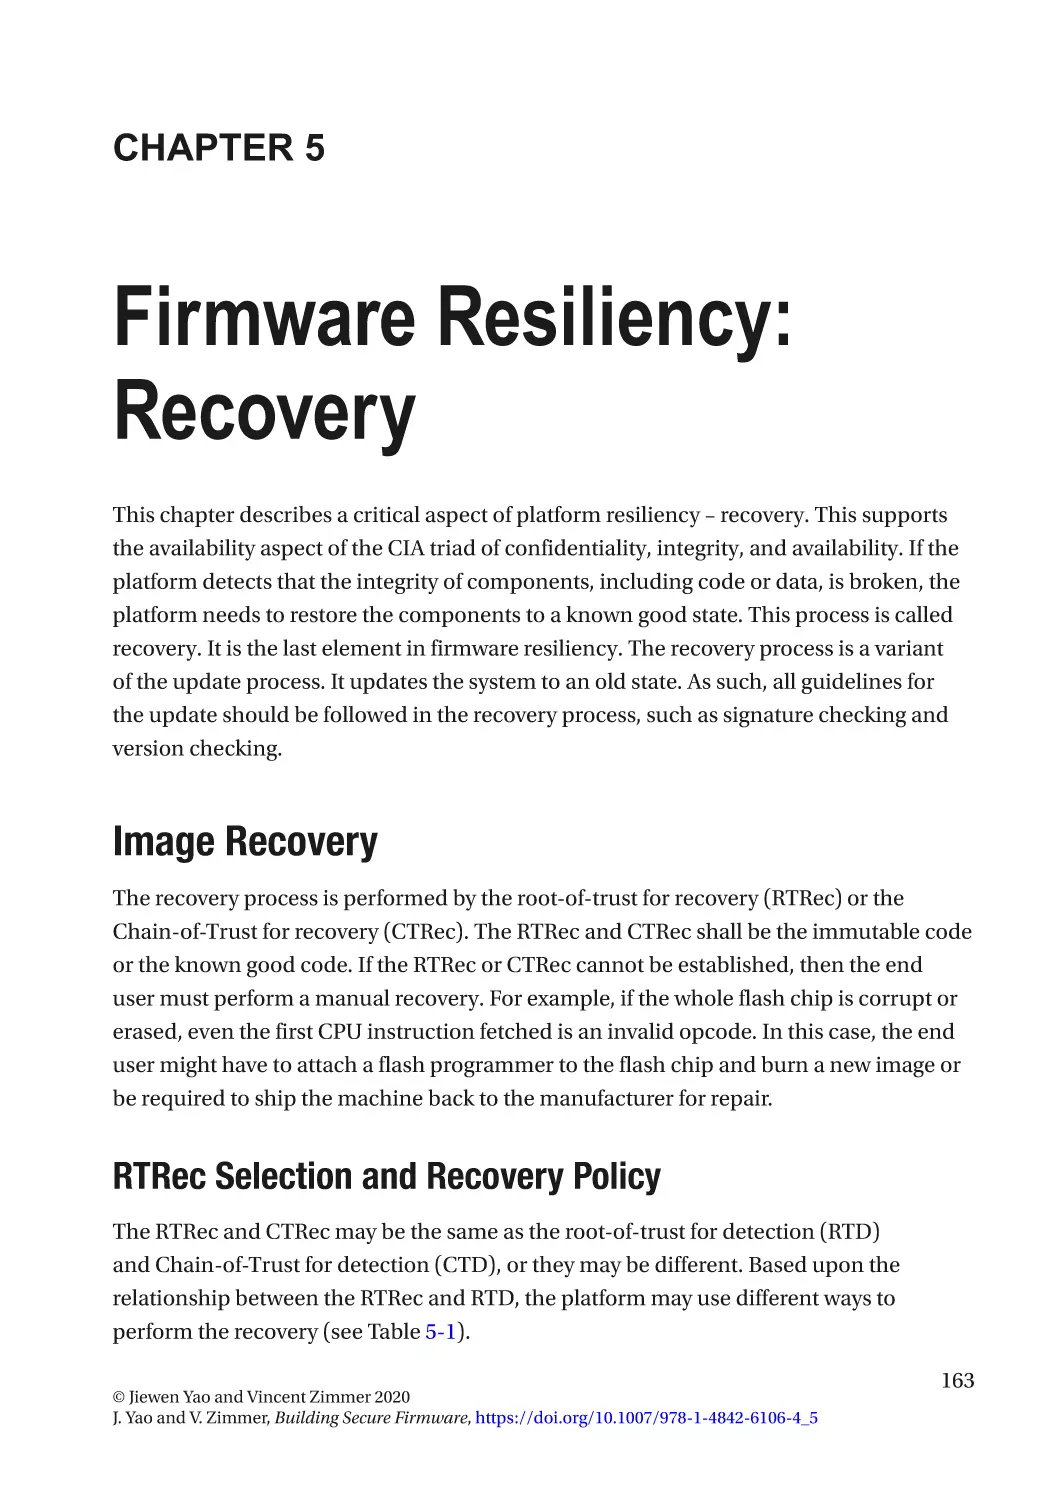 Chapter 5
Image Recovery
RTRec Selection and Recovery Policy